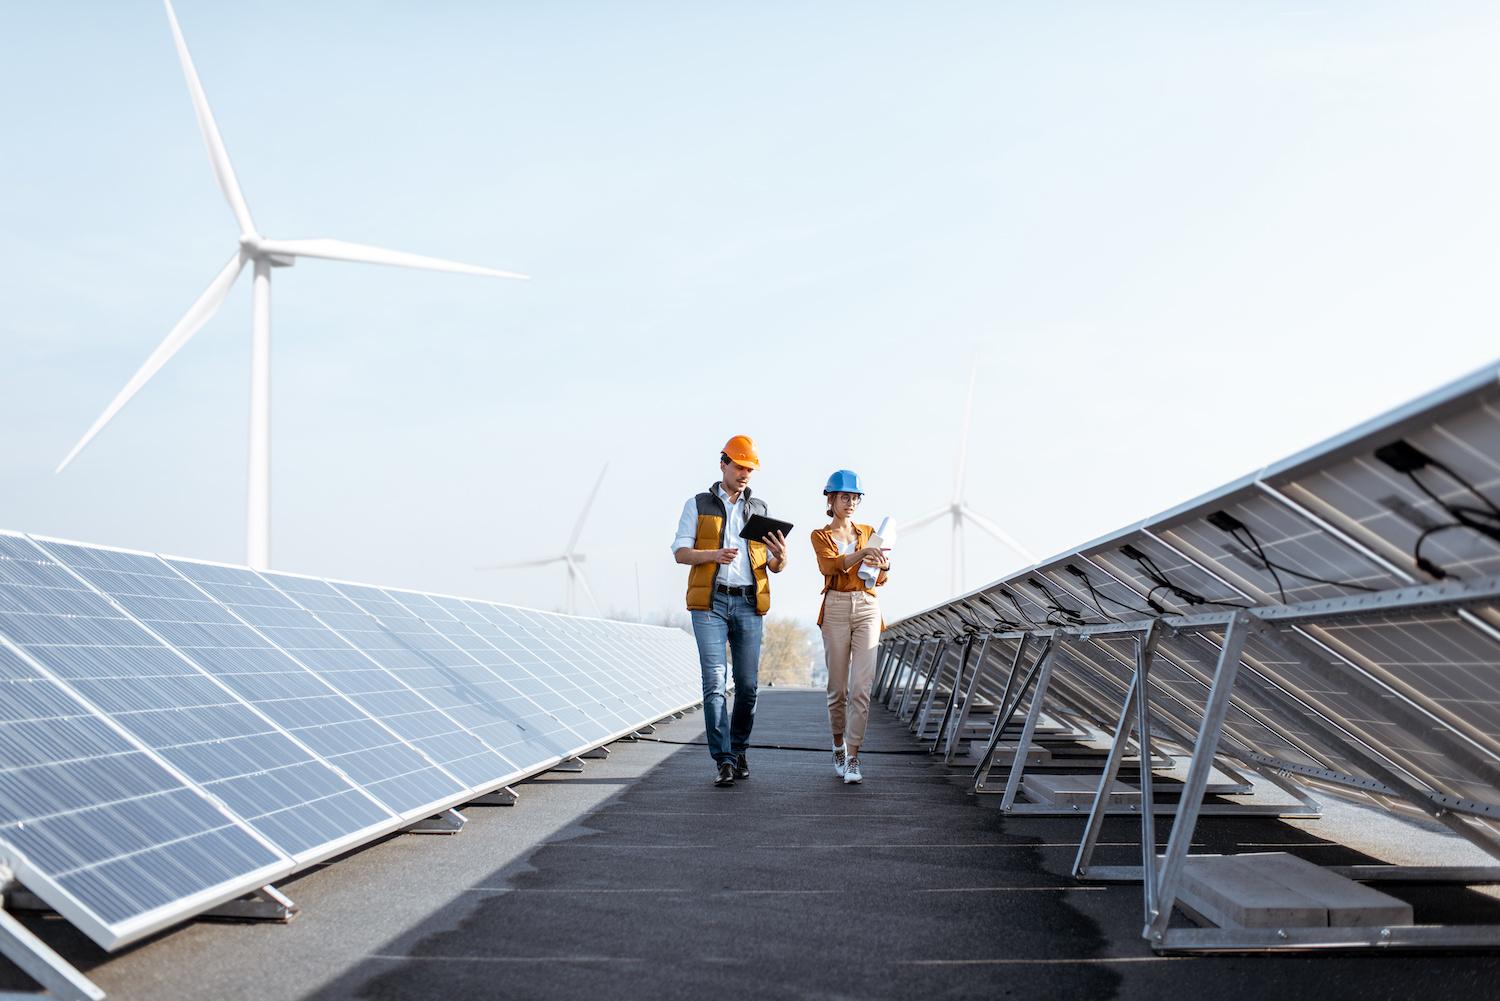 Workers walking through a solar power plant with wind turbines in the background - Achieving the SDGs with renewable energy